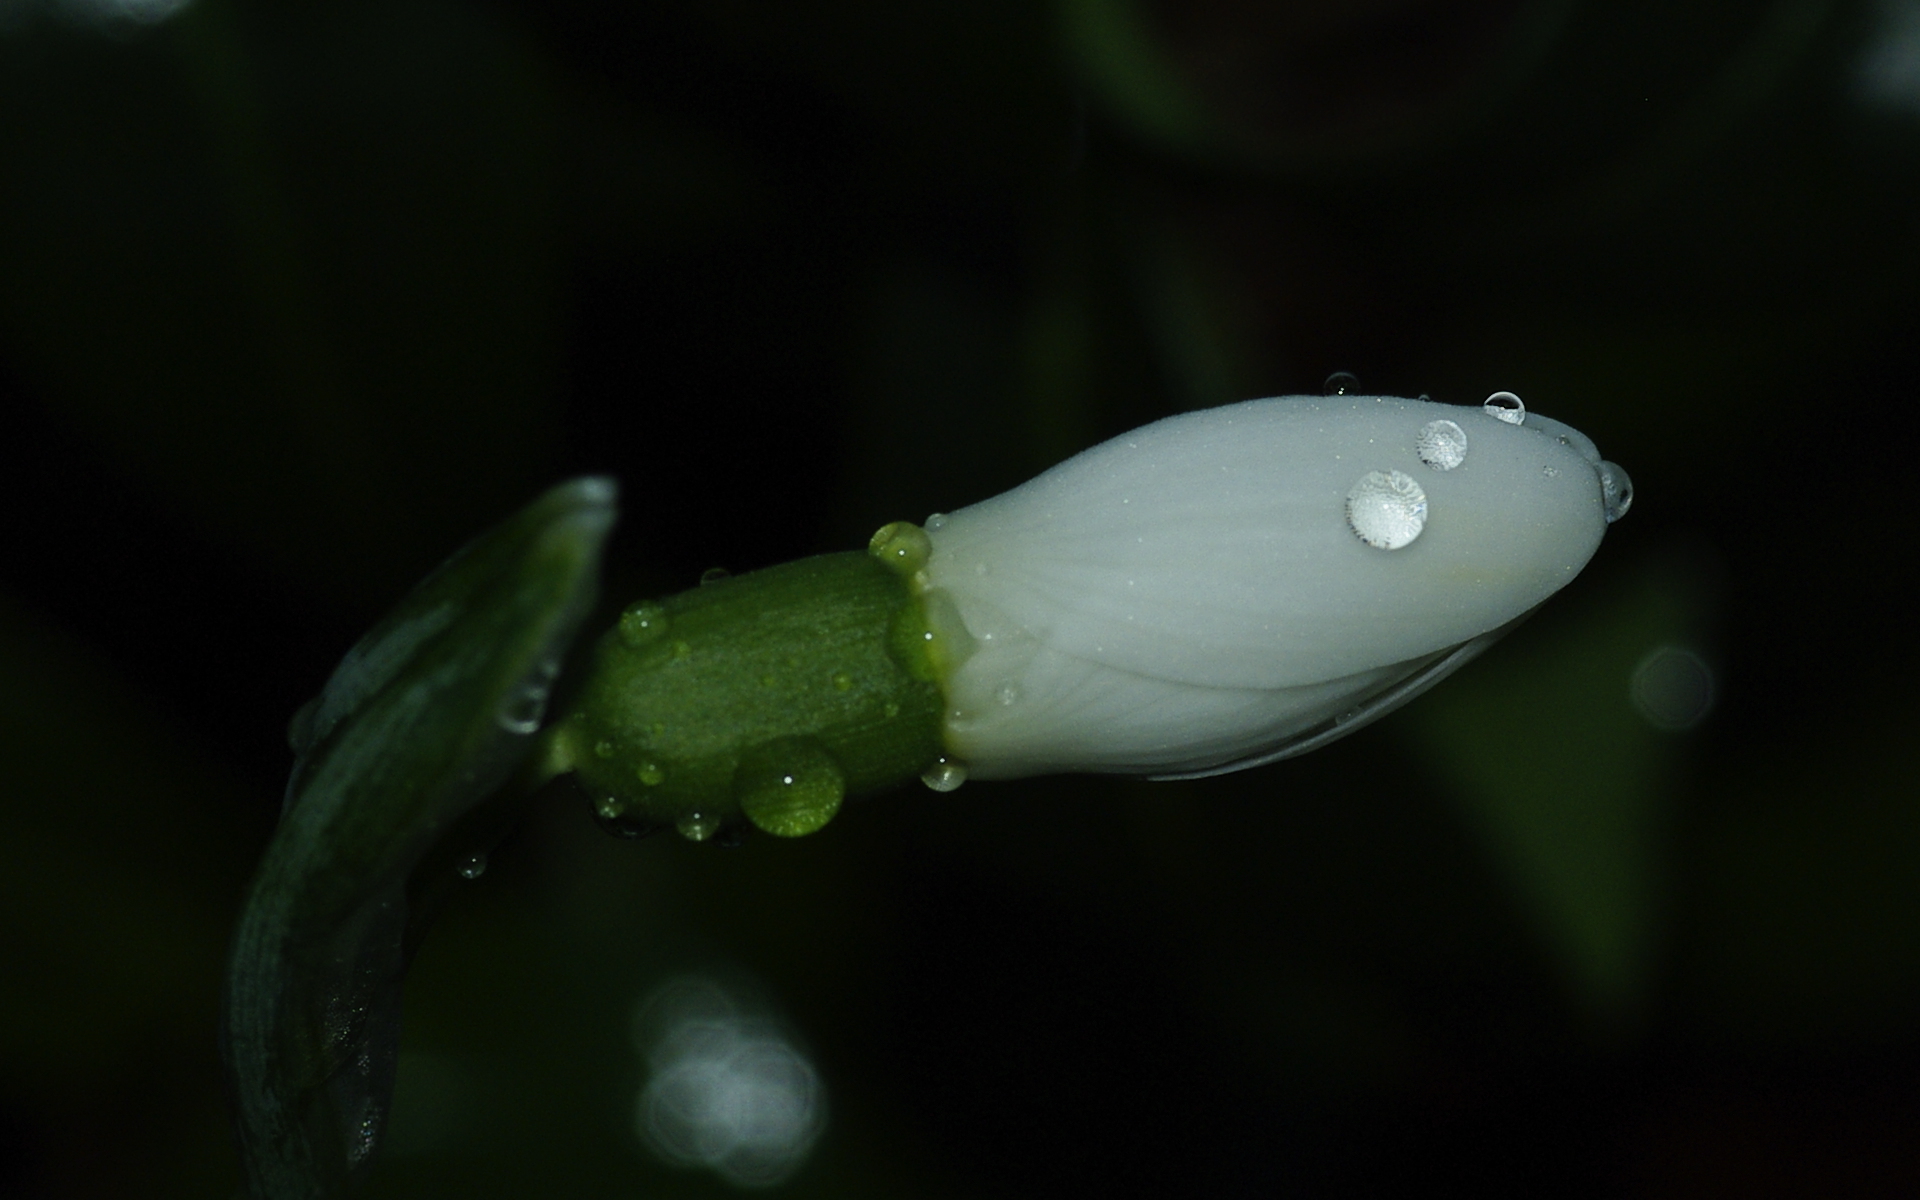 Snowdrop in January